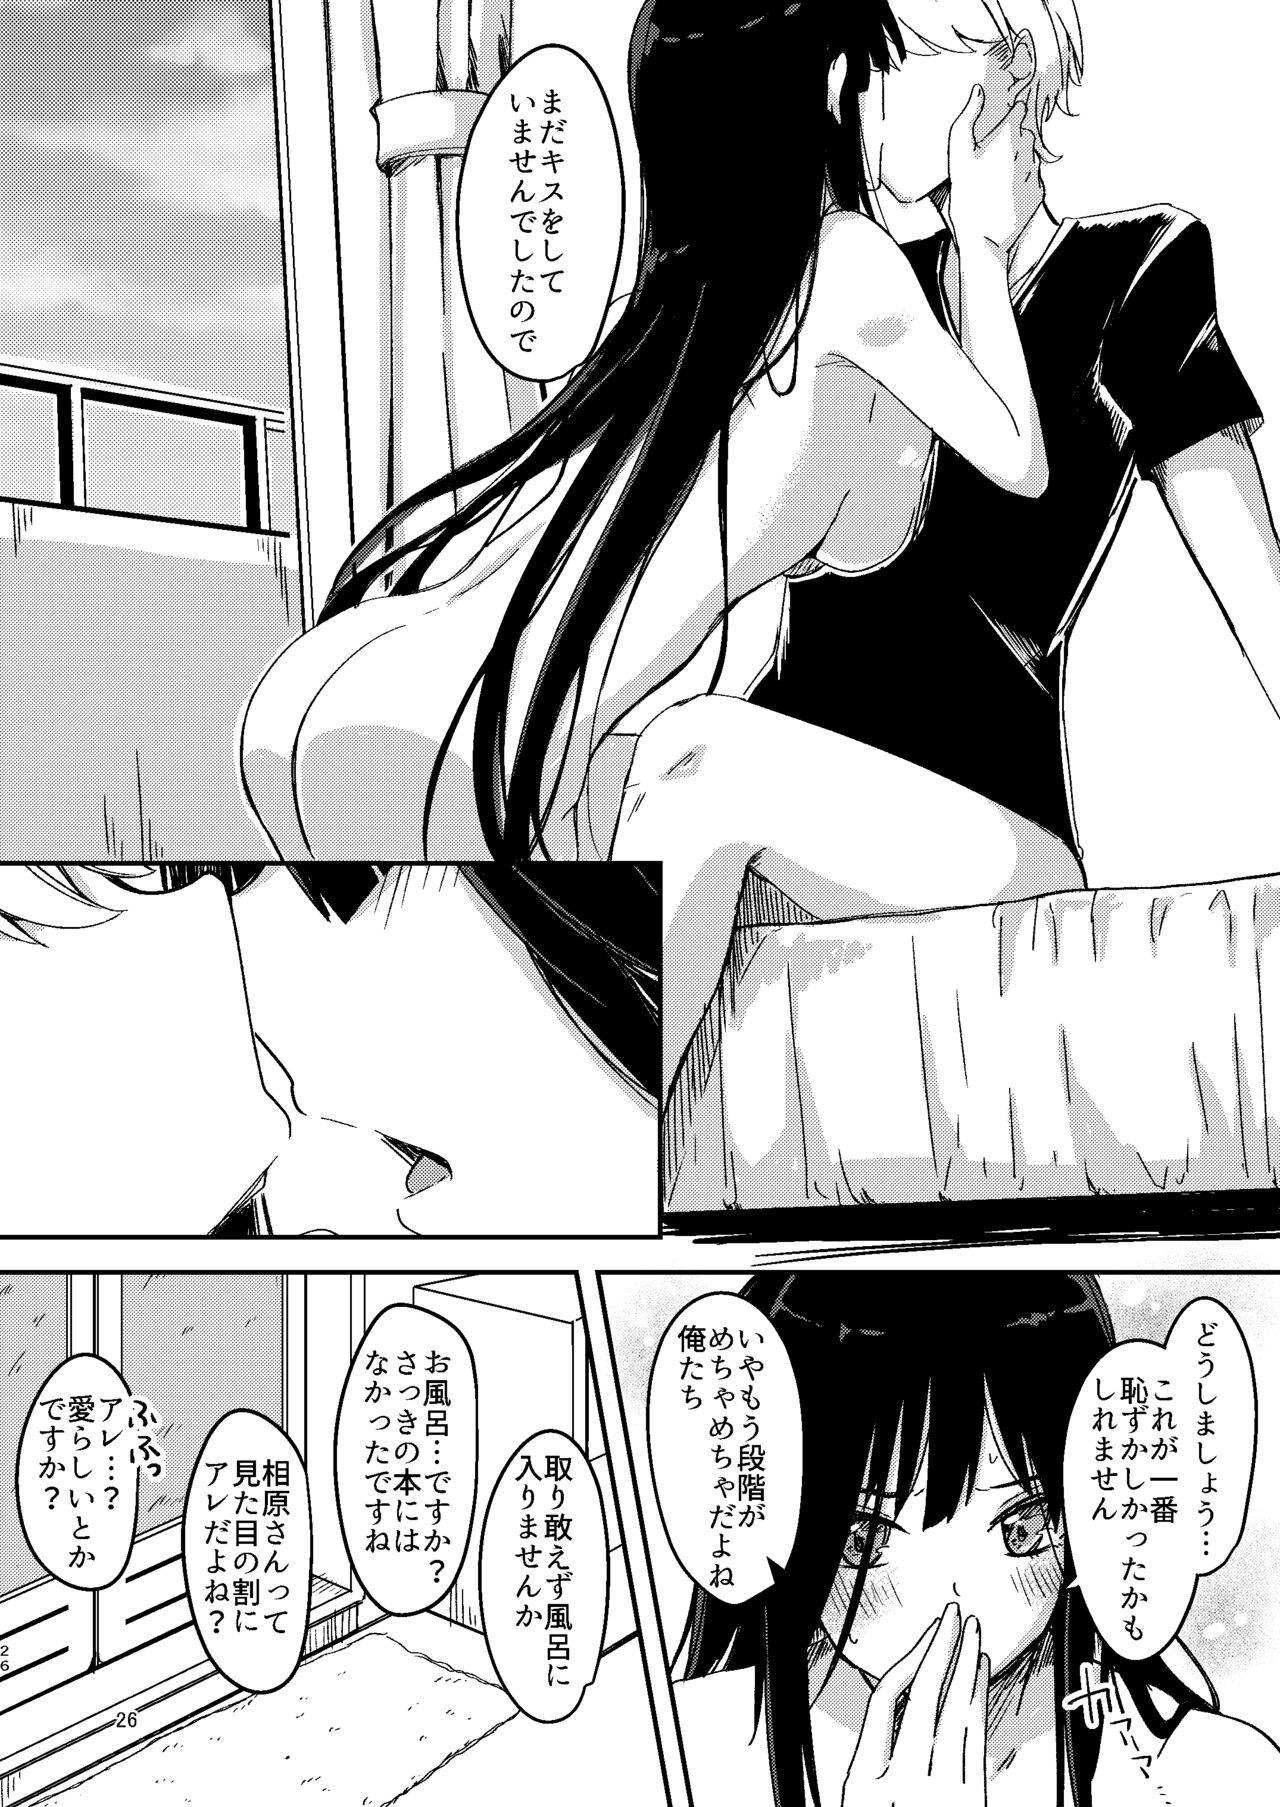 Blackcock 雨降るあくる日あの子をうちに Best Blowjob Ever - Page 25